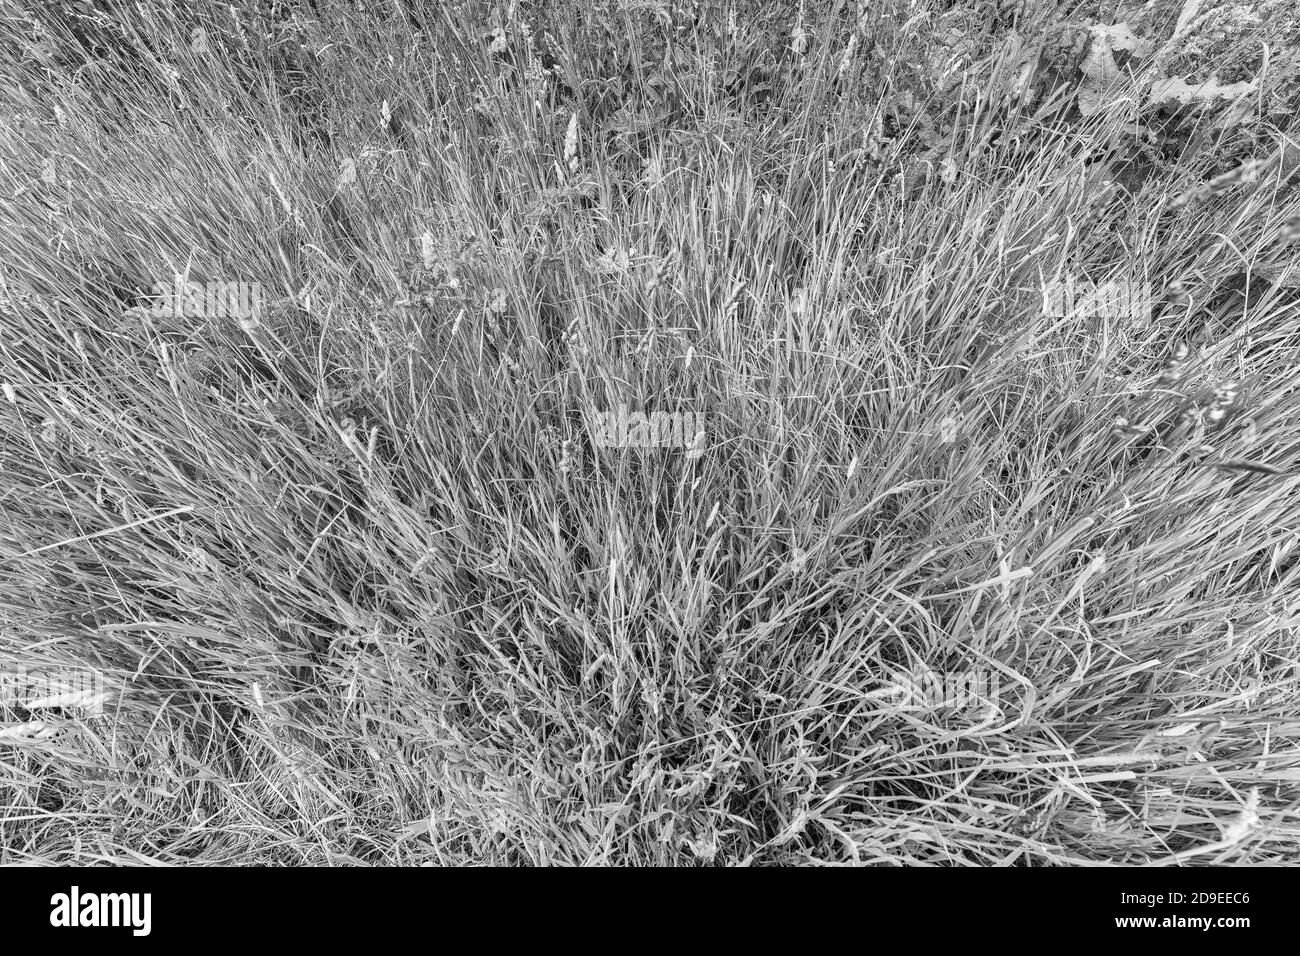 Black & white abstract wide angle shot of a tuft of large / long grass in a rural road grass verge, emphasising the depth. Overgrown metaphor. Stock Photo